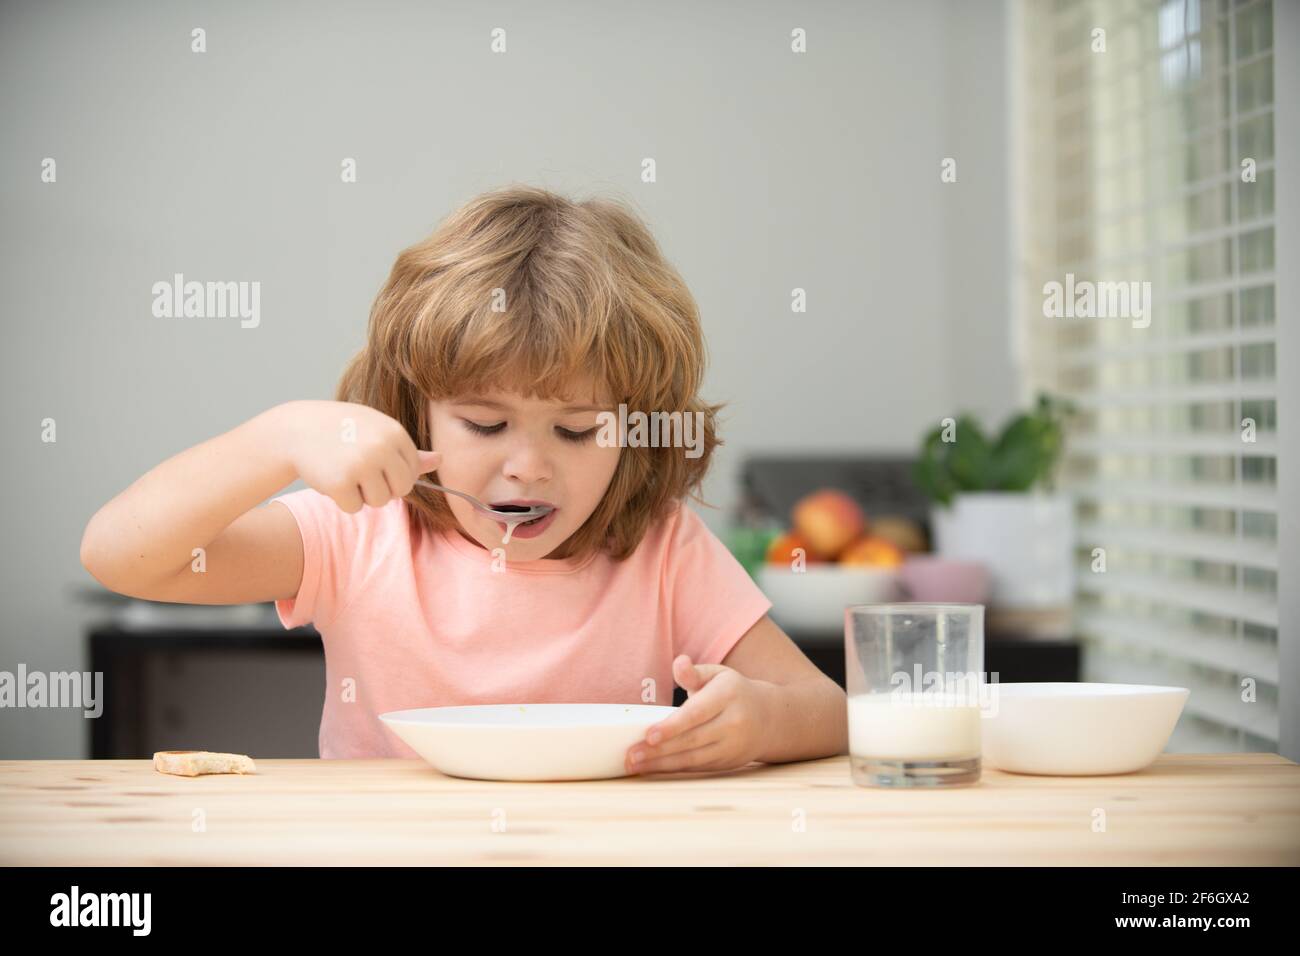 Little healthy hungry baby boy eating soup from with spoon. Child nutrition. Stock Photo